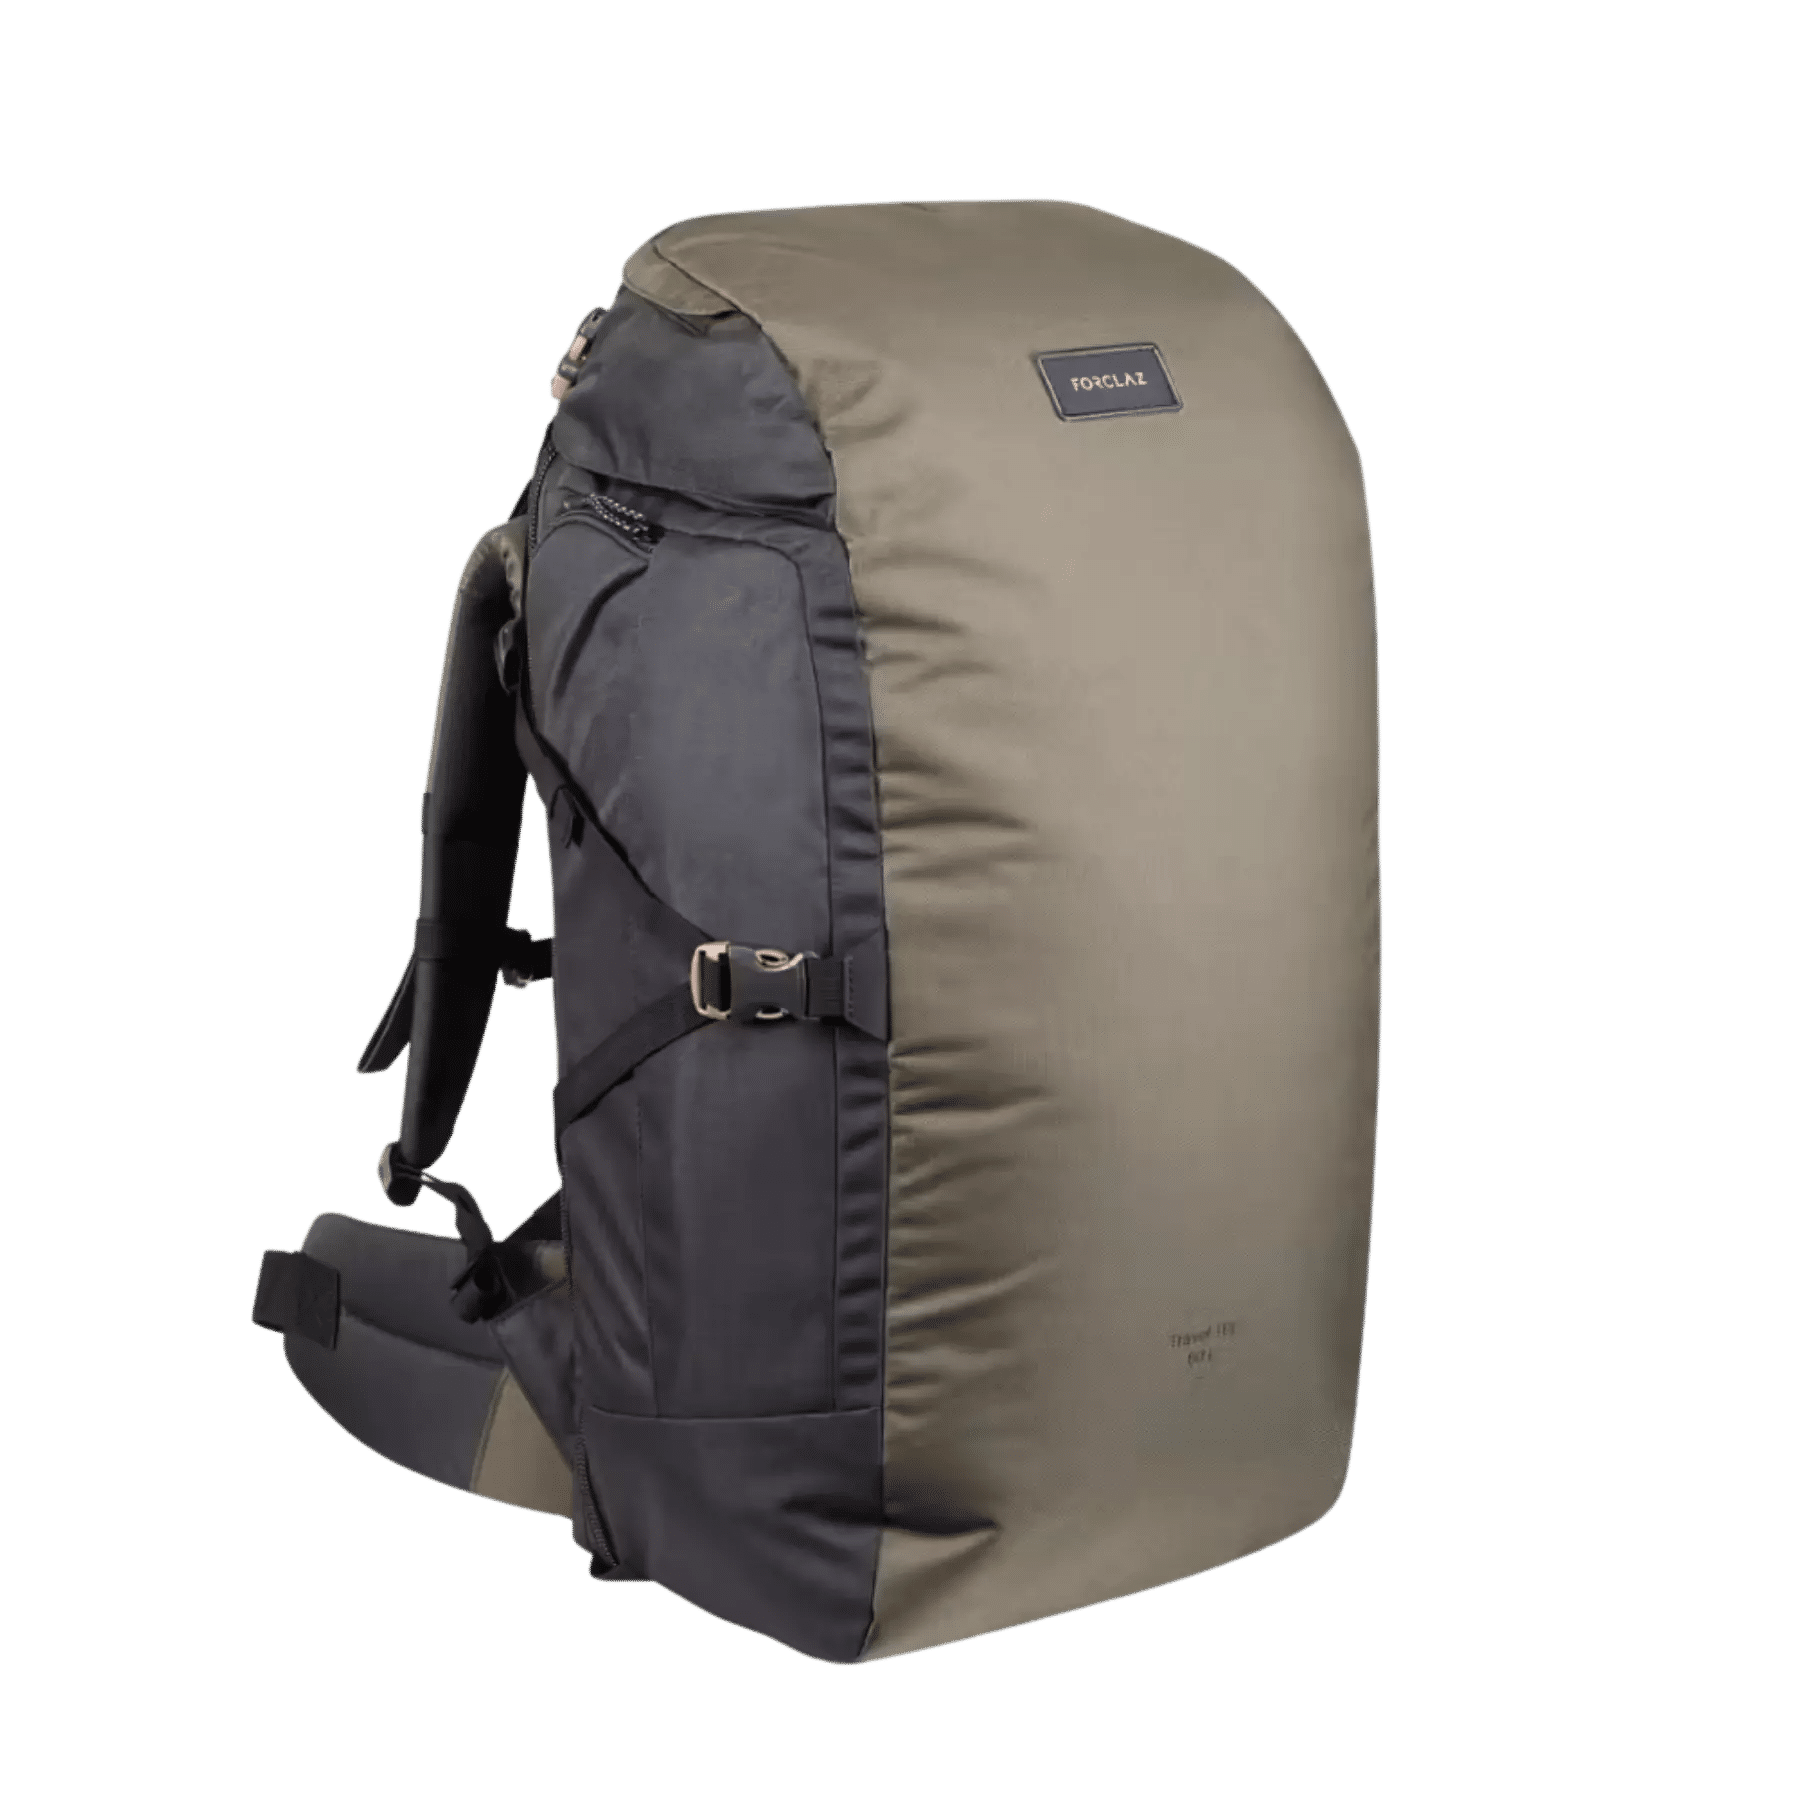 These are product images of 60L Backpack on rent by SharePal.